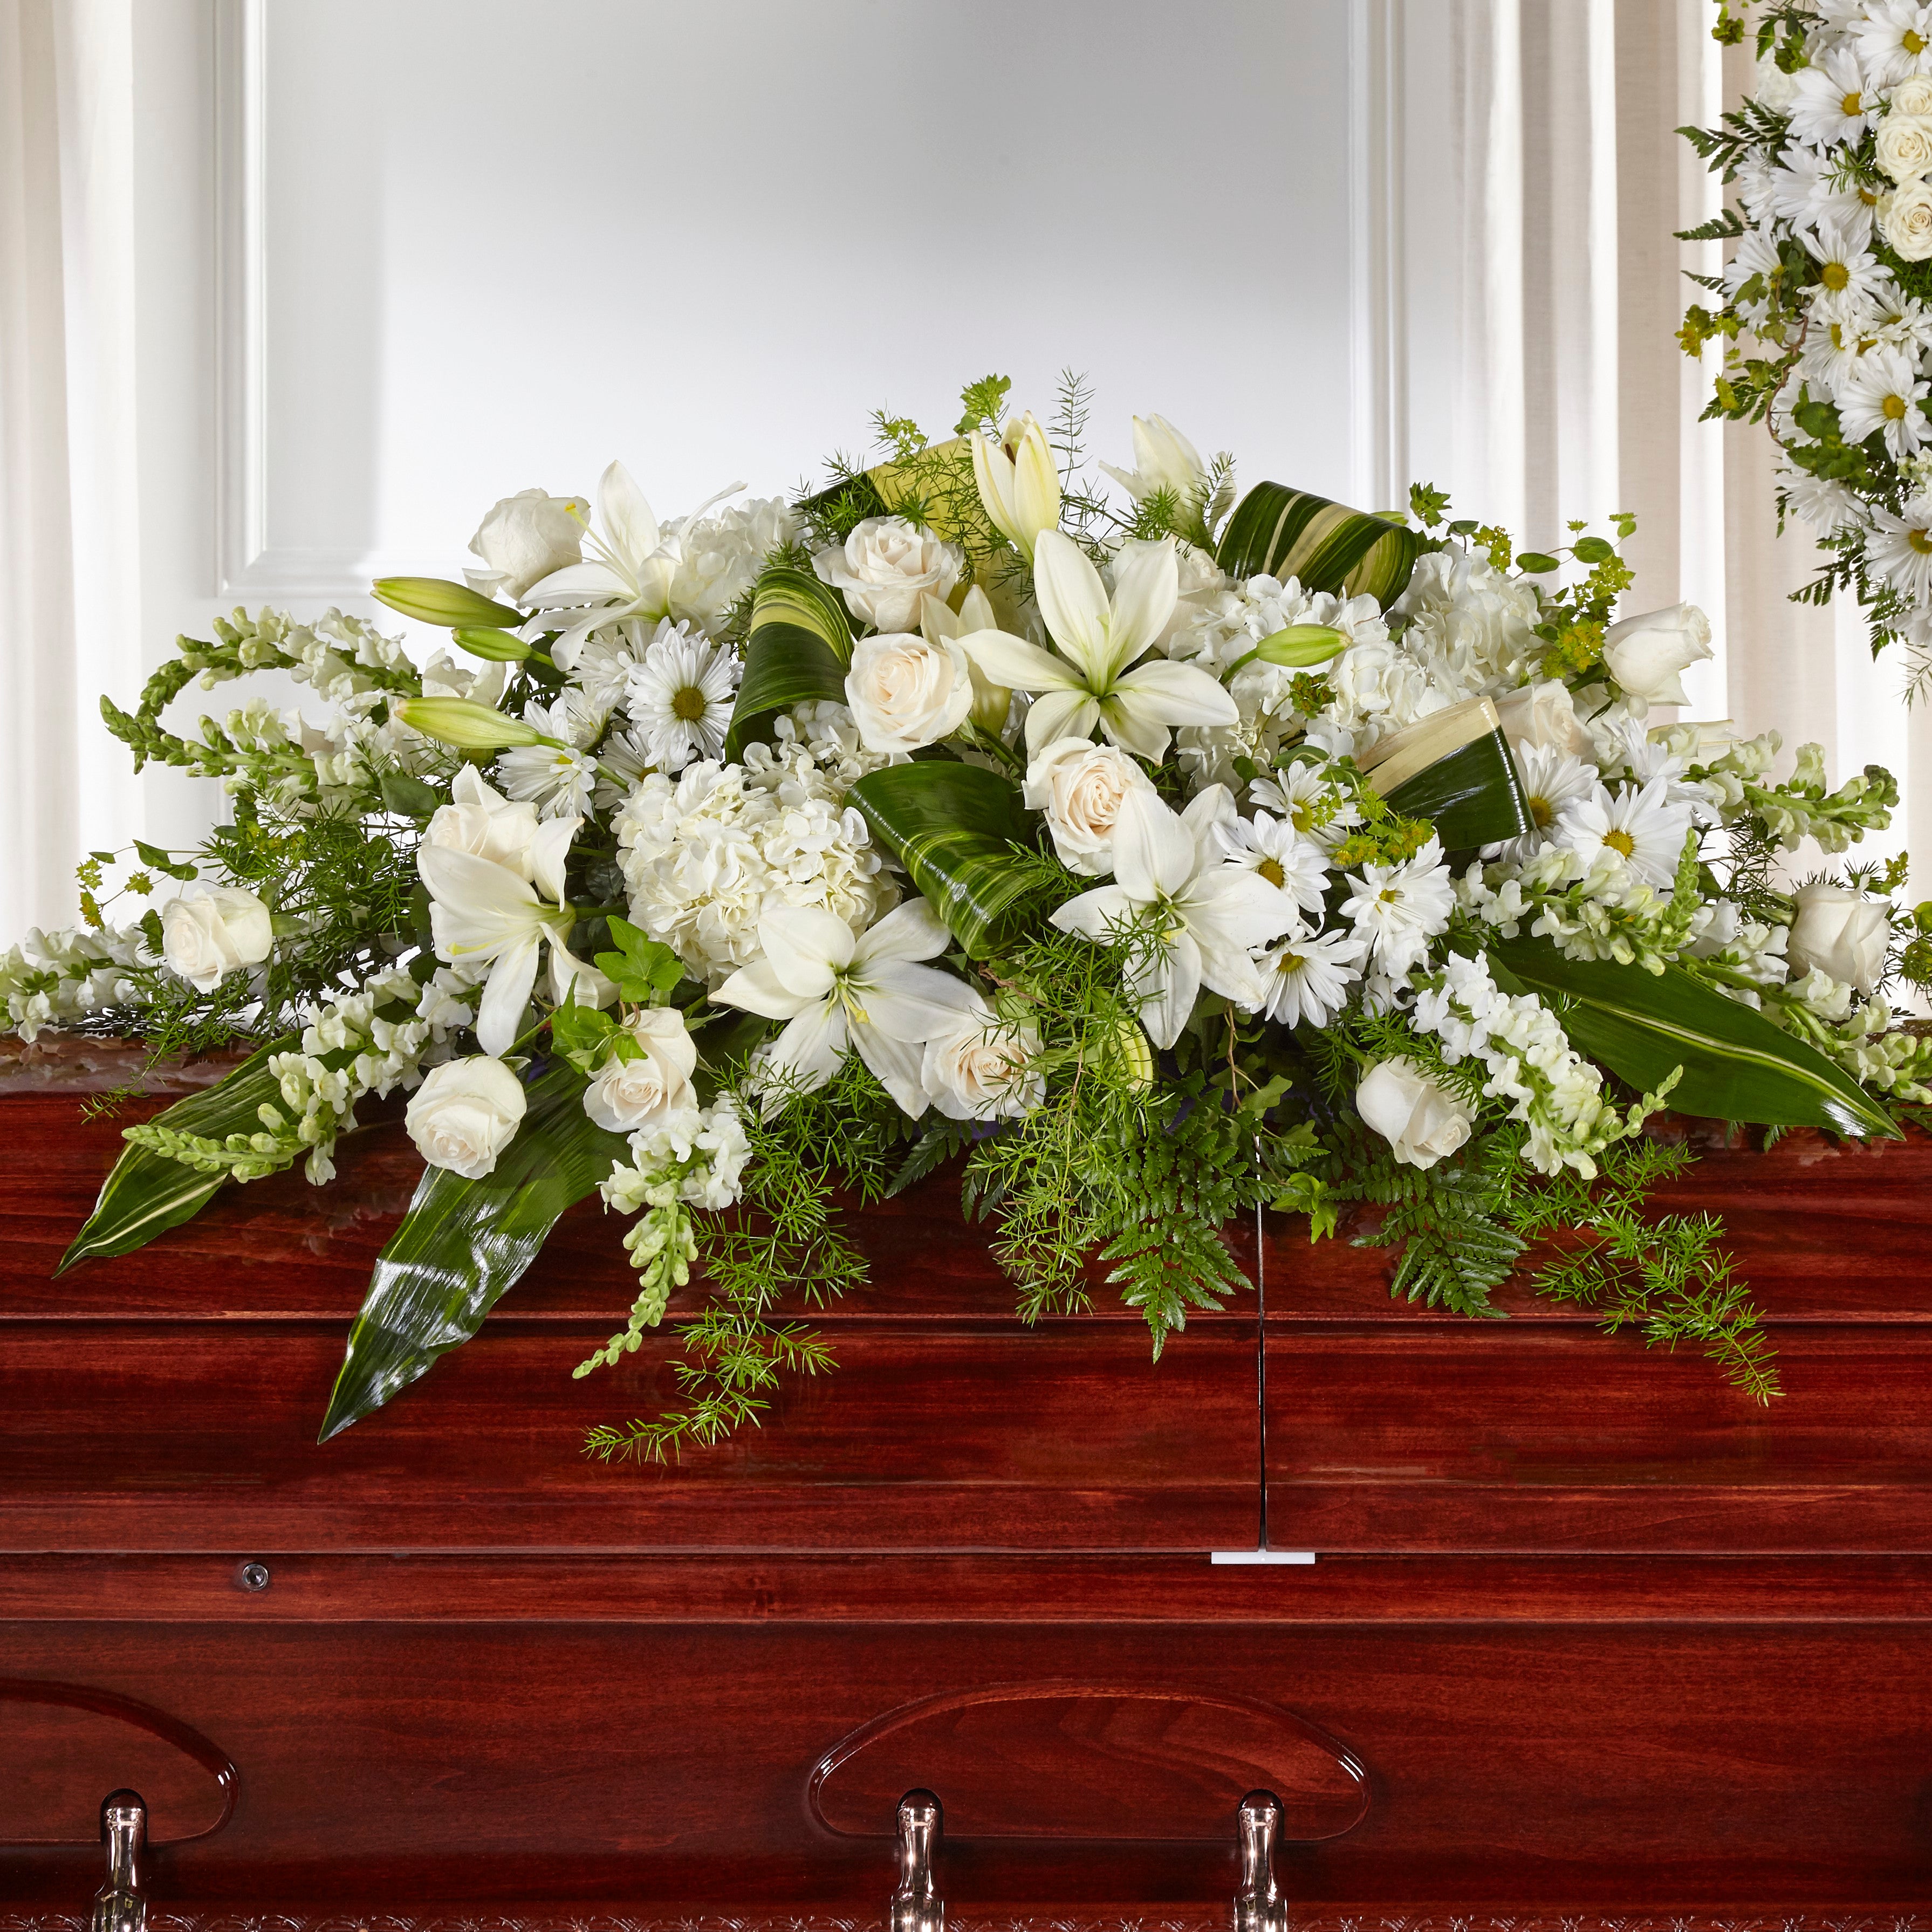 WHITE AND GOLD REST CASKET FLOWERS in Henderson, NC - The People's Choice  D'Campbell Floral D'Zign Studi